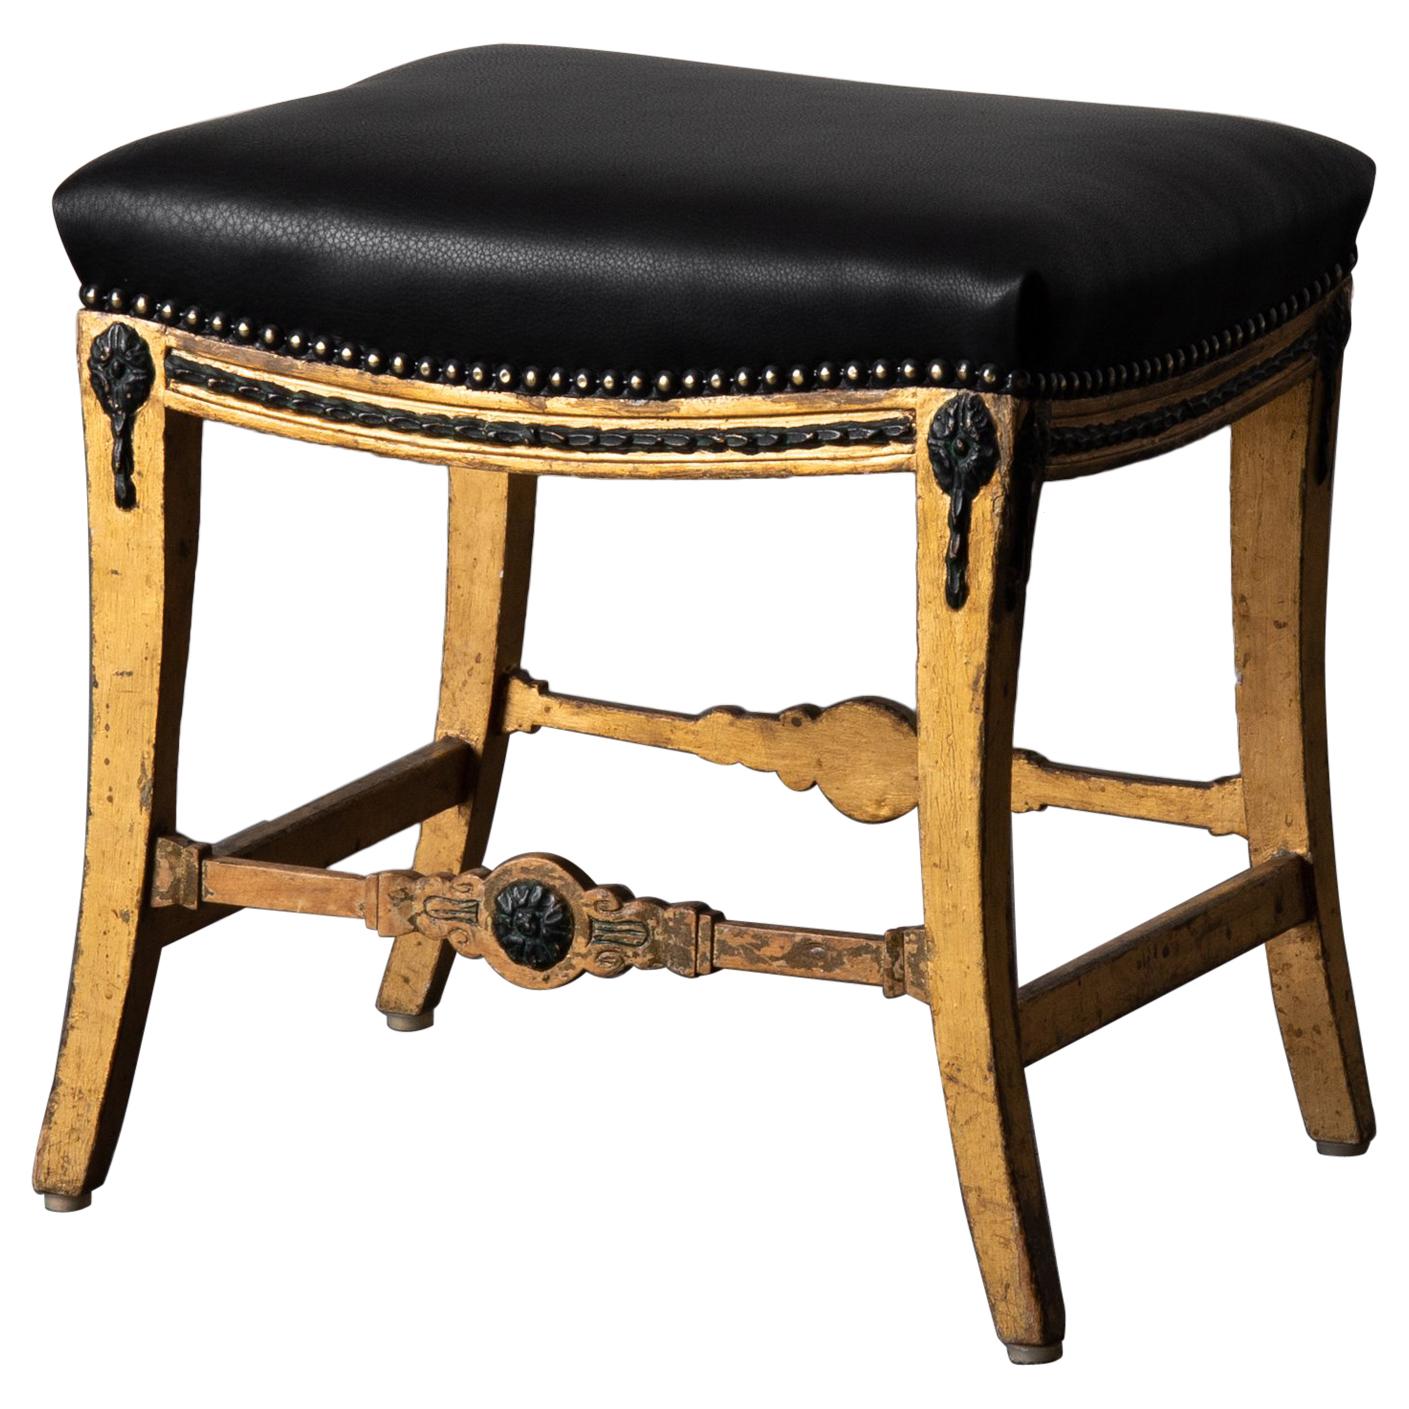 Stool Bench Swedish Neoclassical 18th Century Gilded Black Leather Sweden